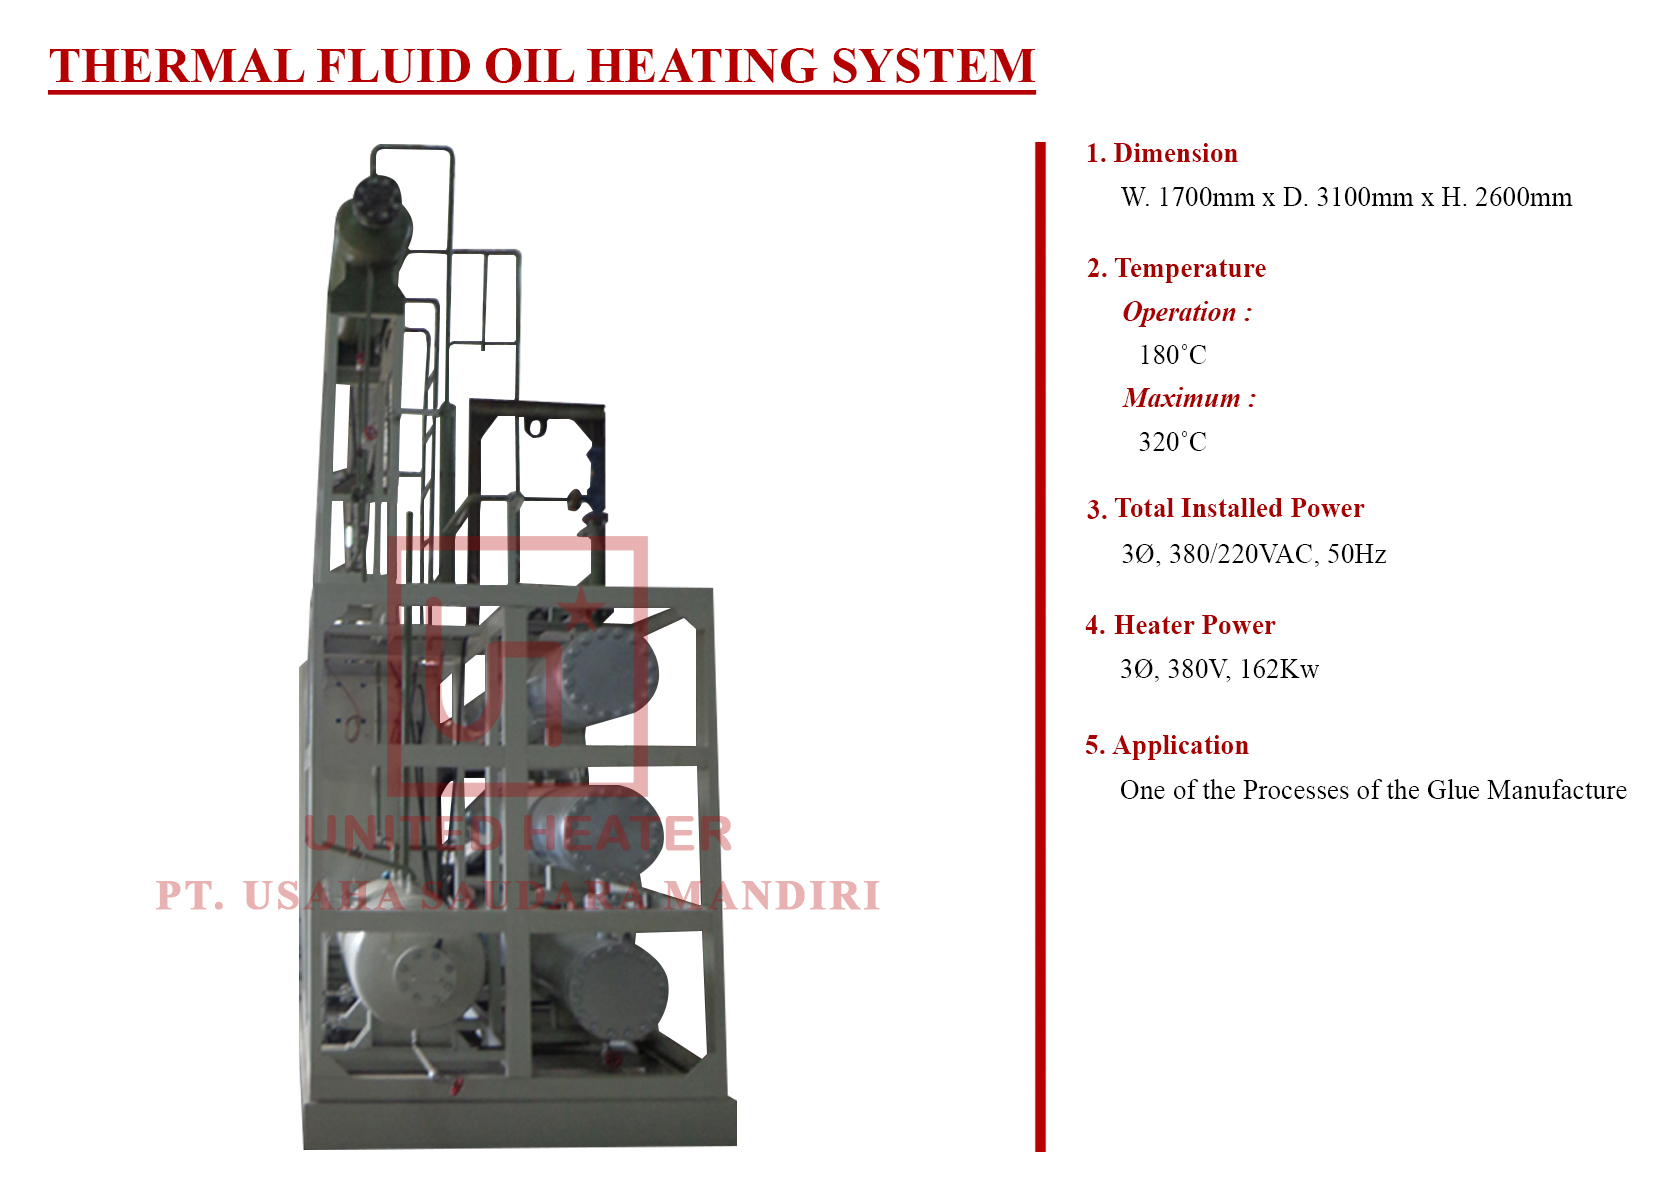 THERMAL FLUID OIL HEATING SYSTEM (PT. DYNEA INDRIA)